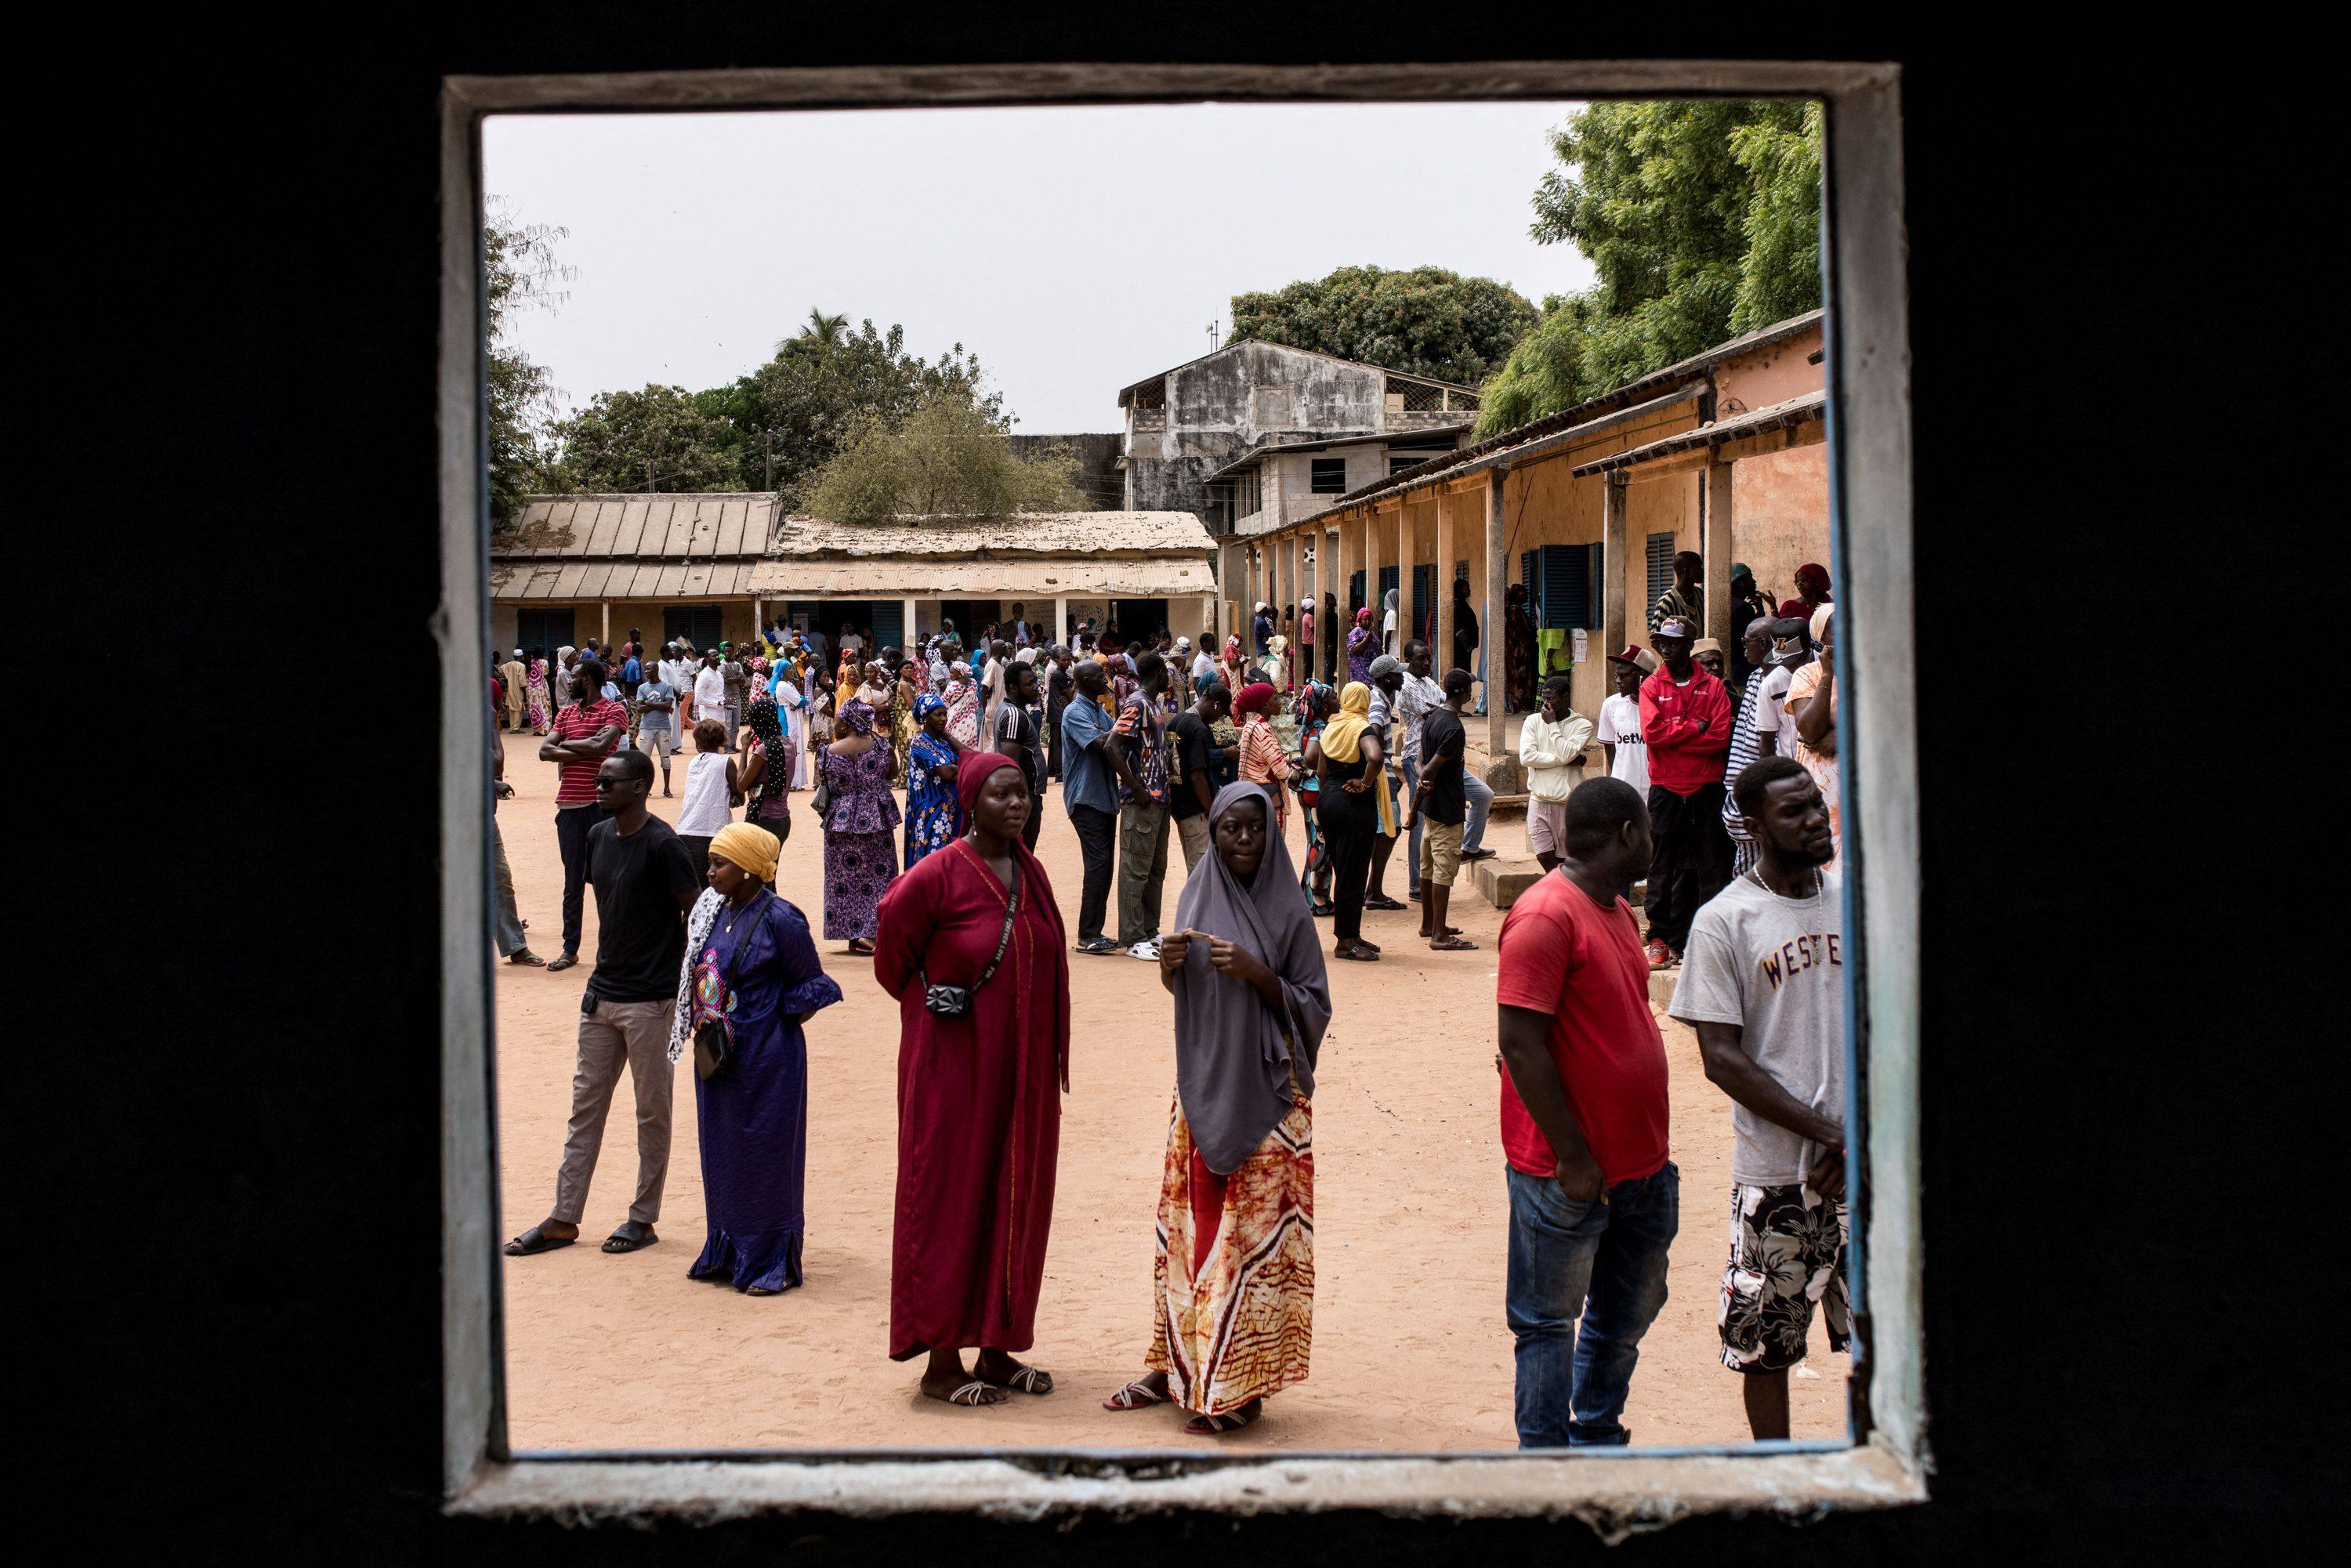 Voters wait to cast their votes outside a polling station in Ziguinchor, Senegal, on Sunday, during presidential elections. Two favourites have emerged: the ruling coalition’s former prime minister Amadou Ba and anti-establishment candidate Bassirou Diomaye Faye. Photo: AFP